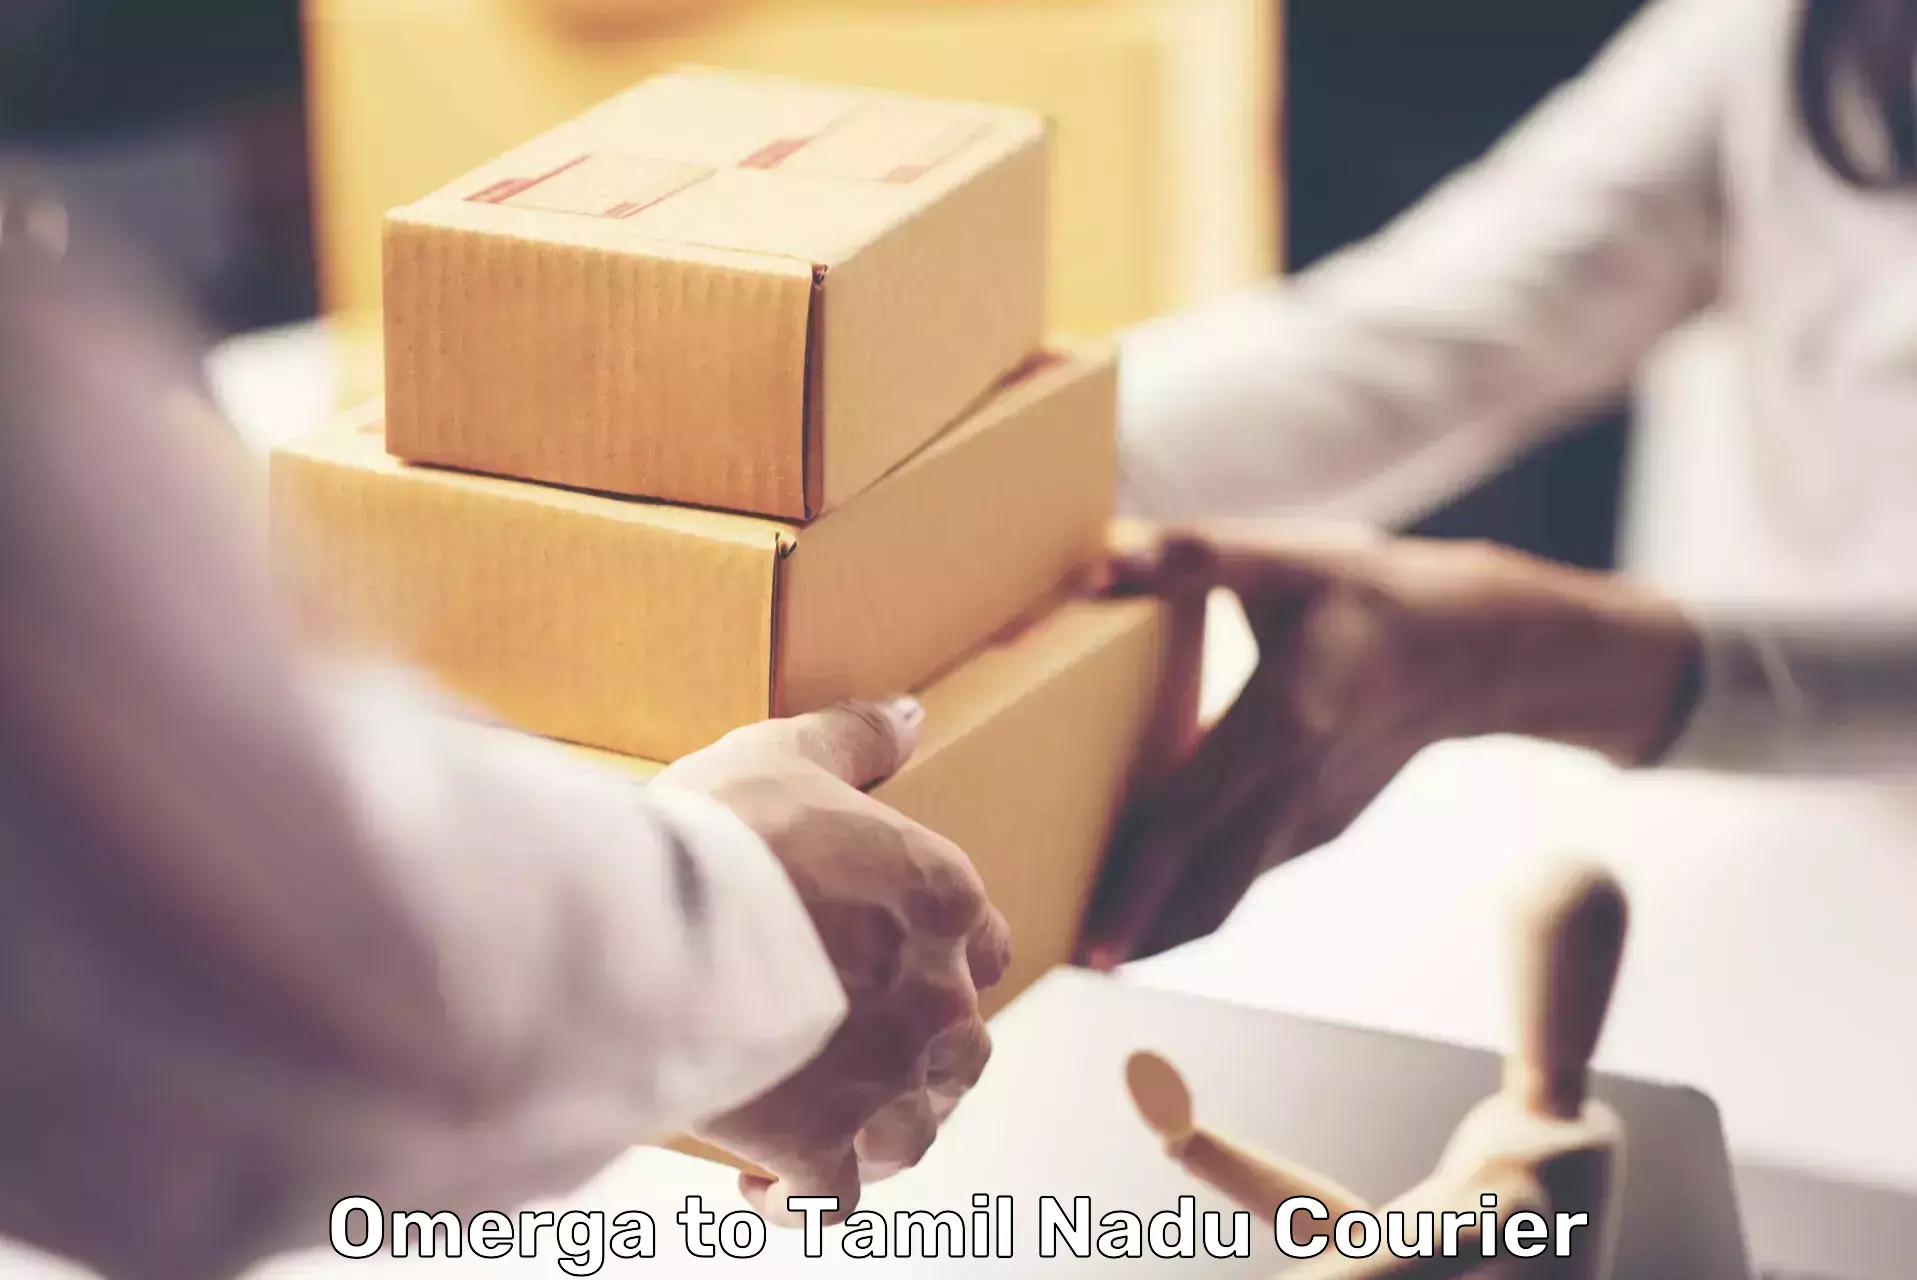 Professional courier handling in Omerga to Mylapore